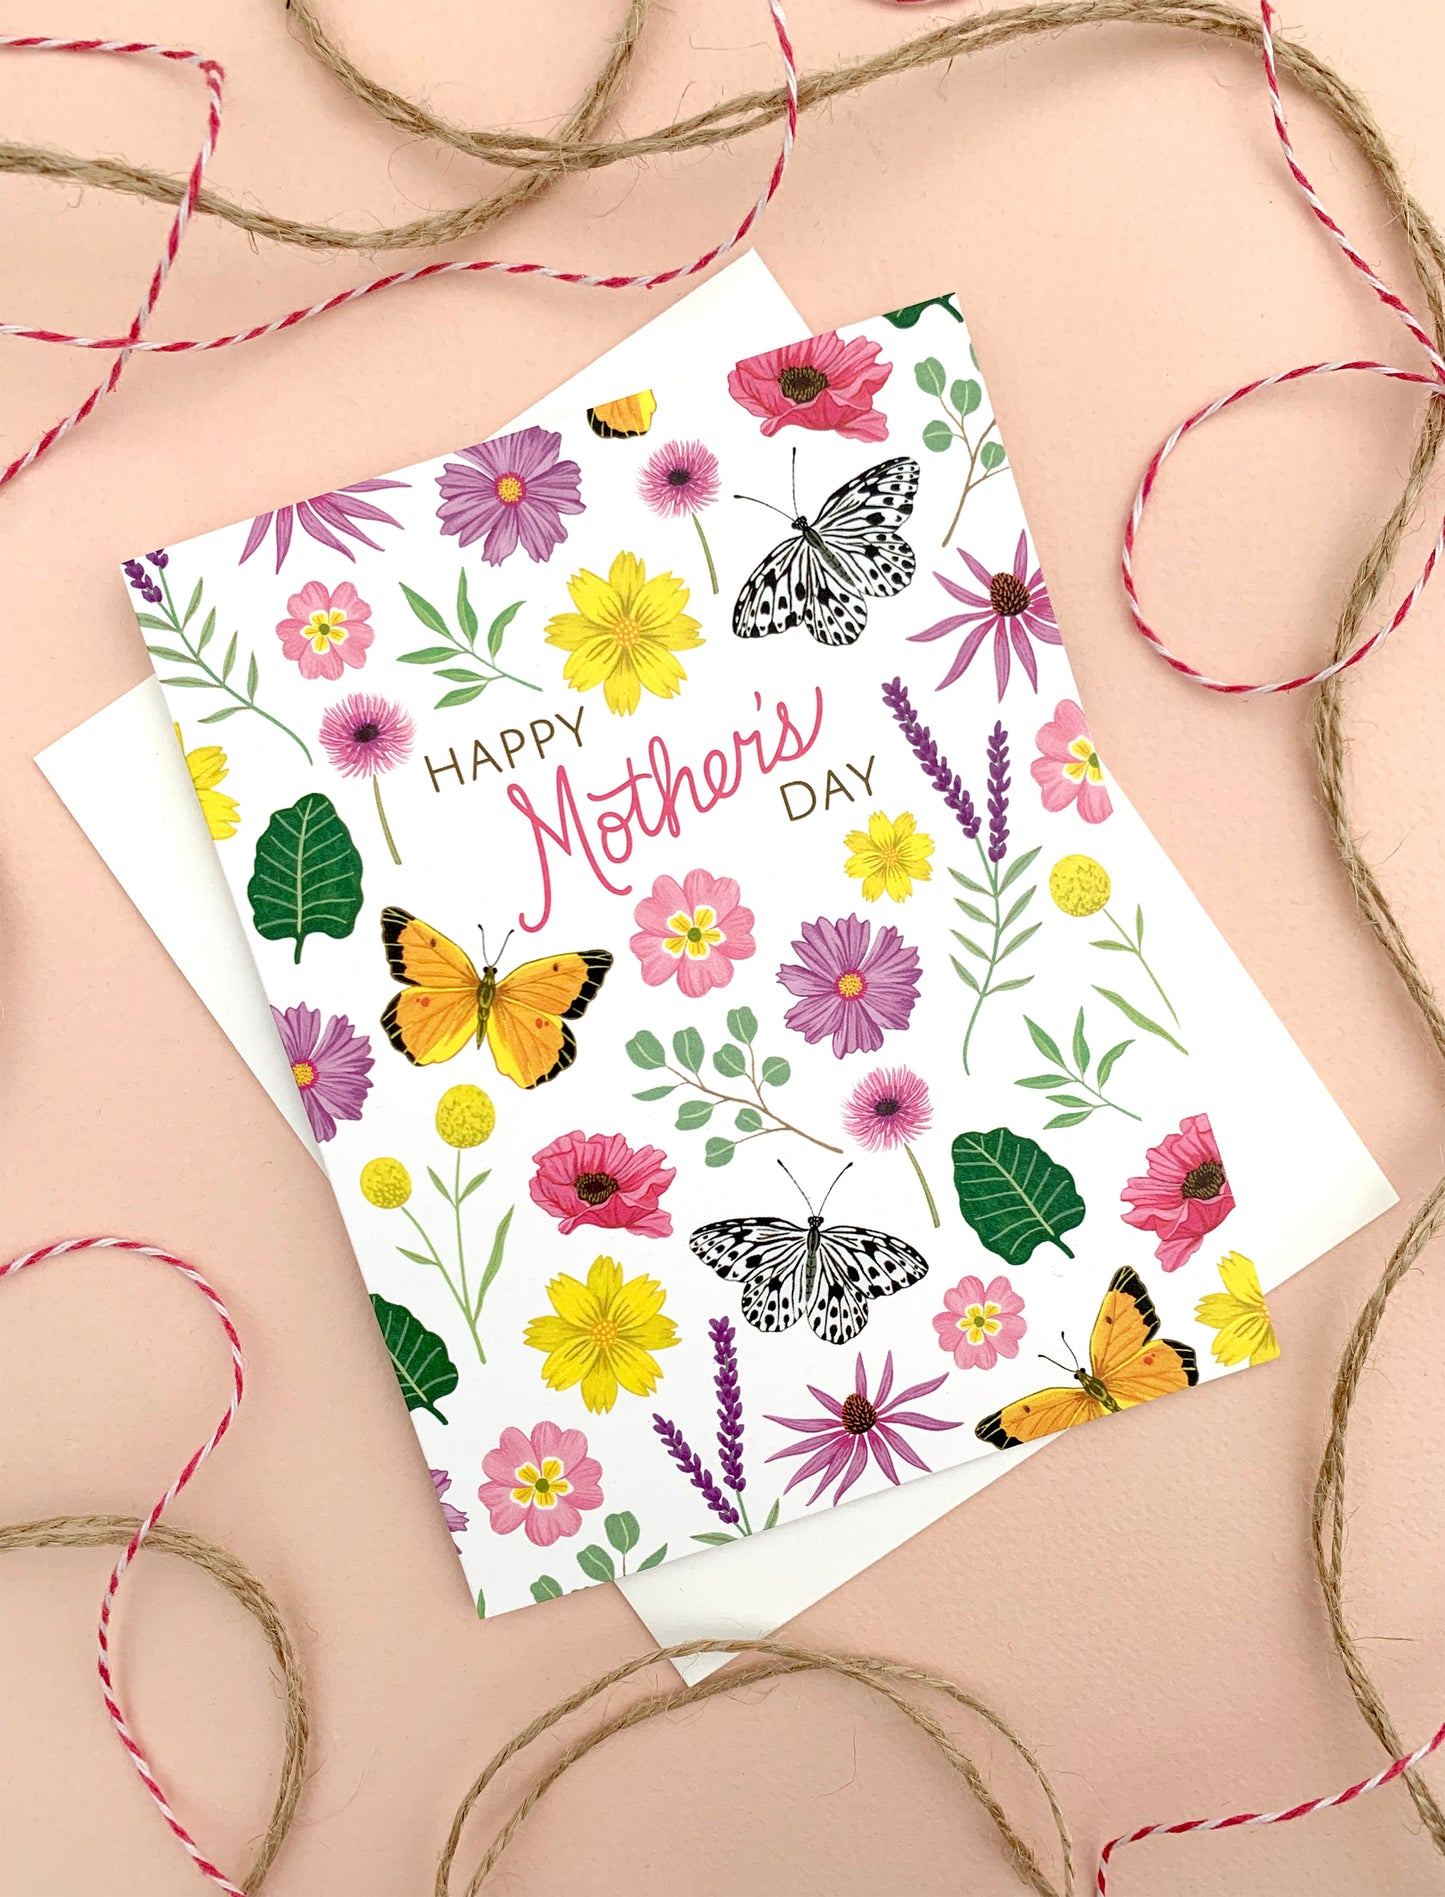 BEAUTIFUL BUTTERFLIES AND FLOWERS - MOTHER'S DAY GREETING CARD